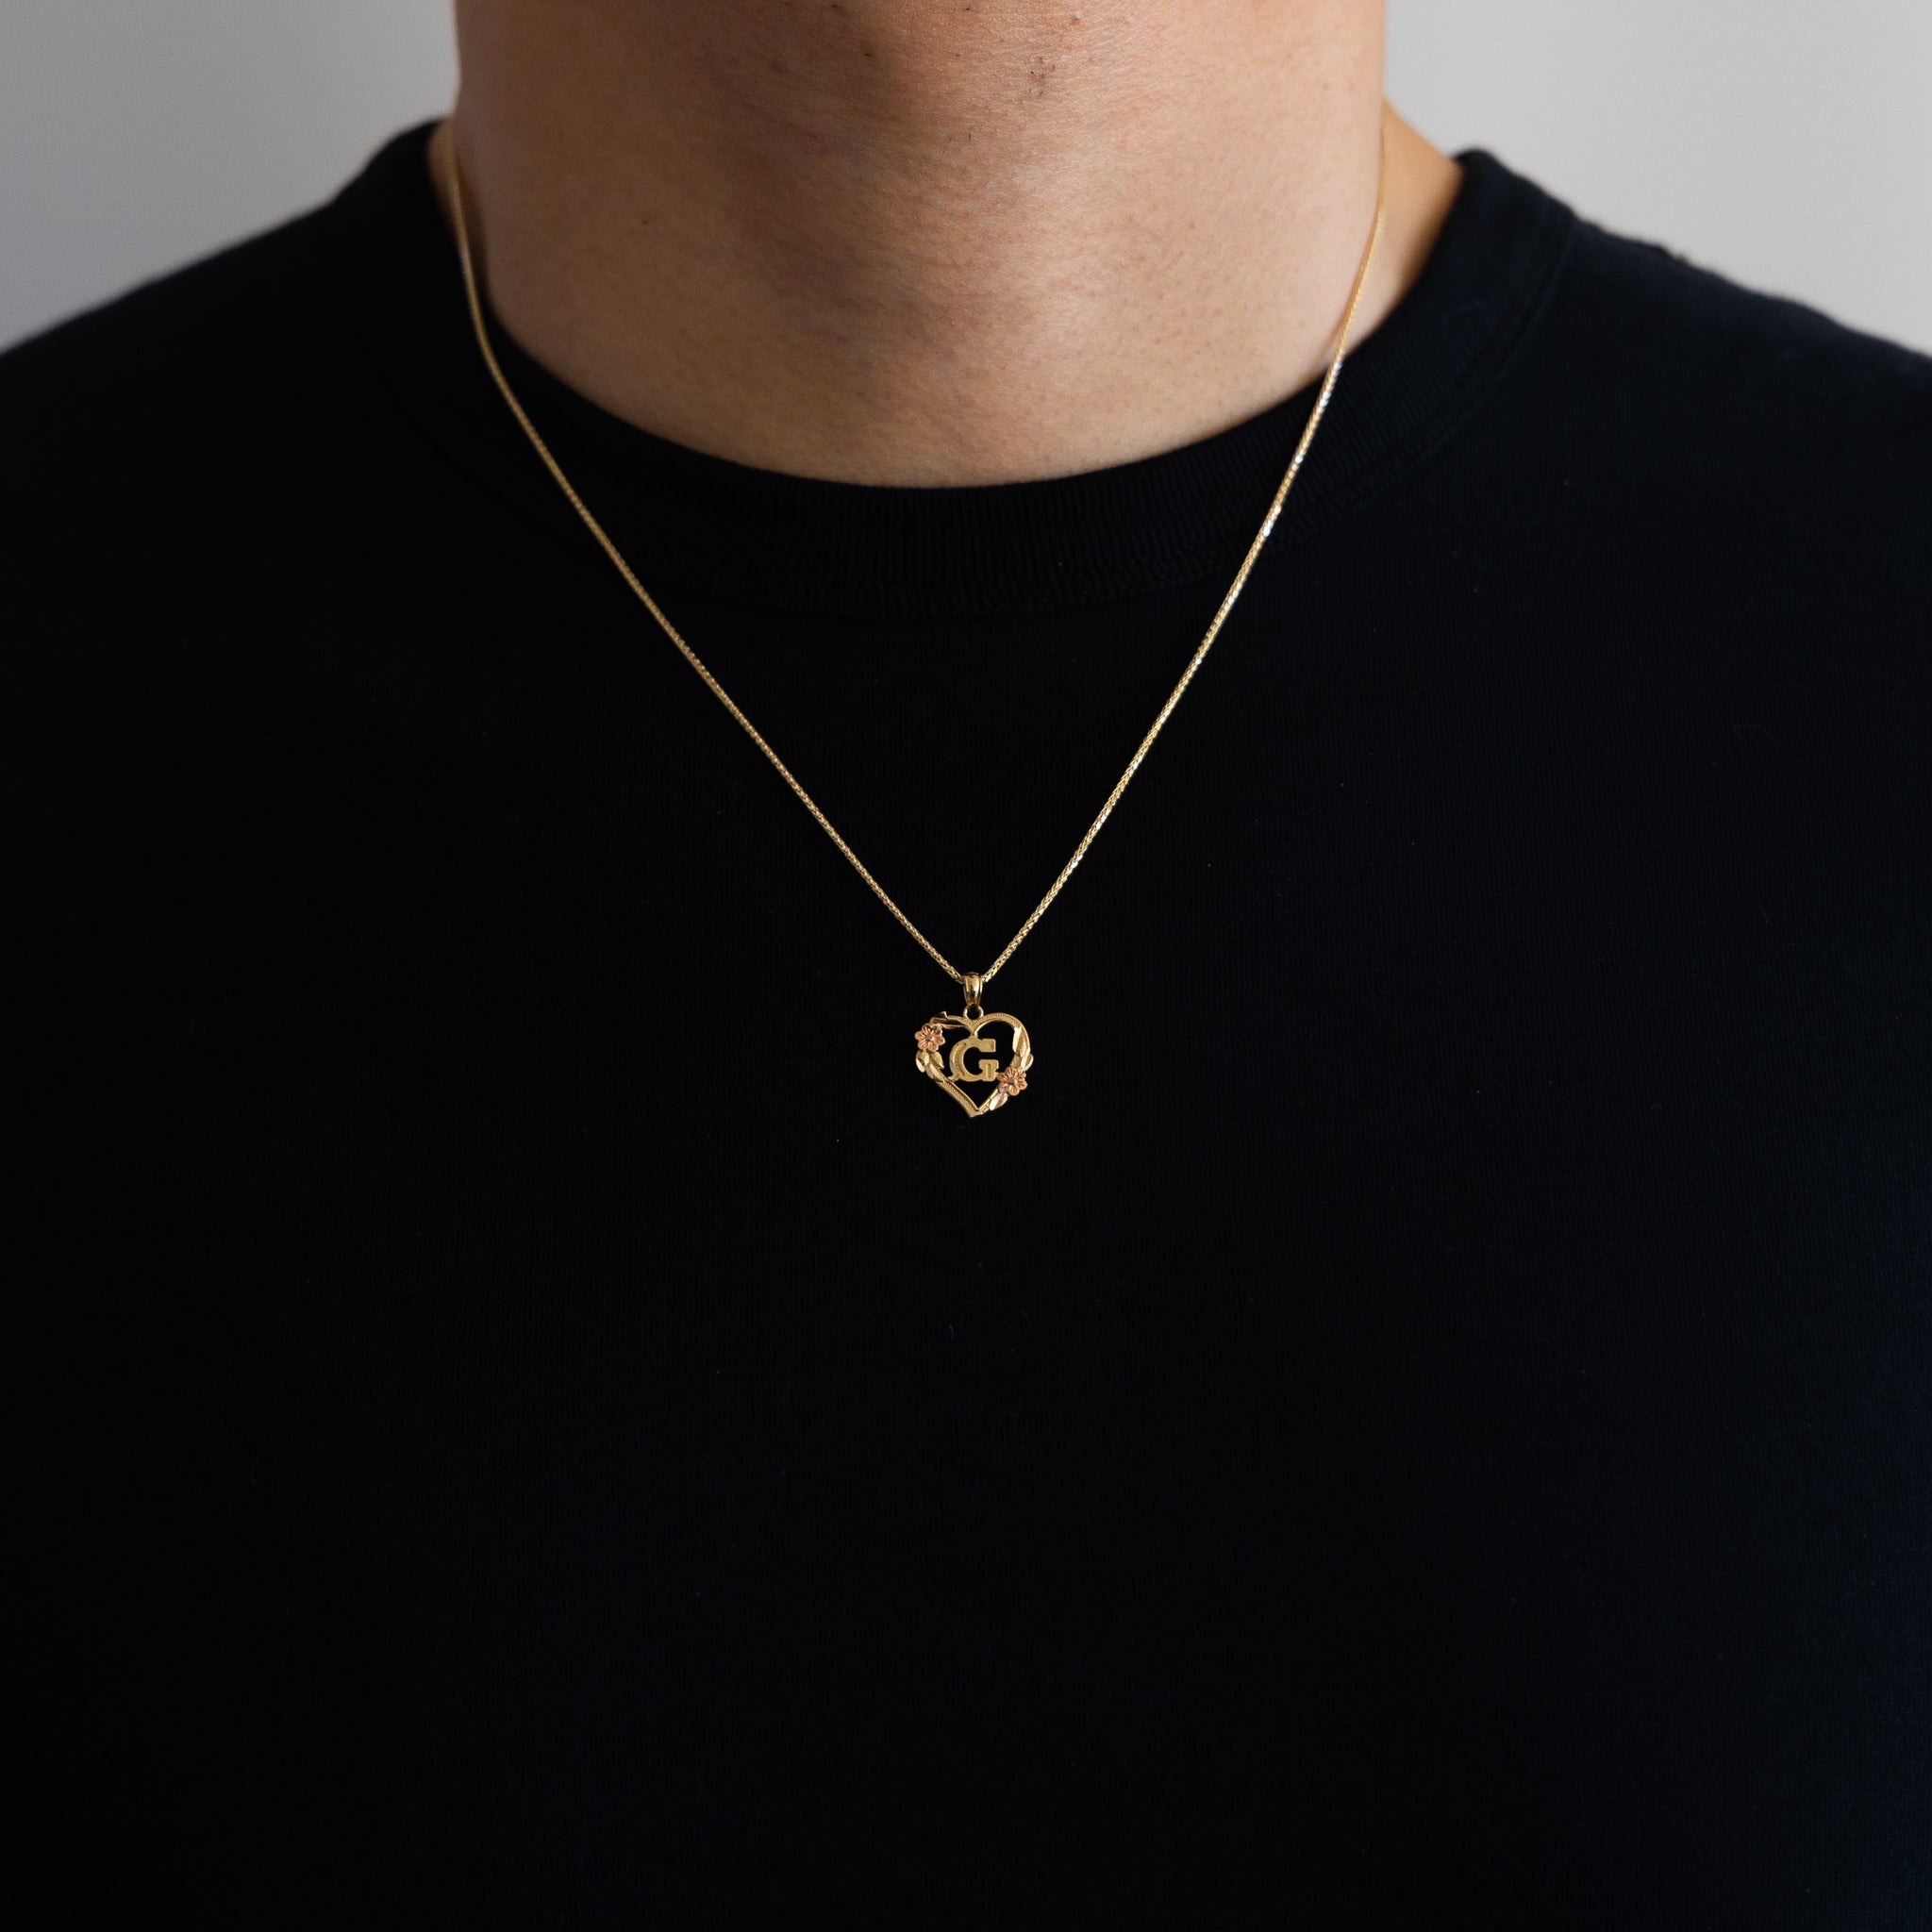 Gold Heart Initial G Pendant | A-Z Pendants - Charlie & Co. Jewelry